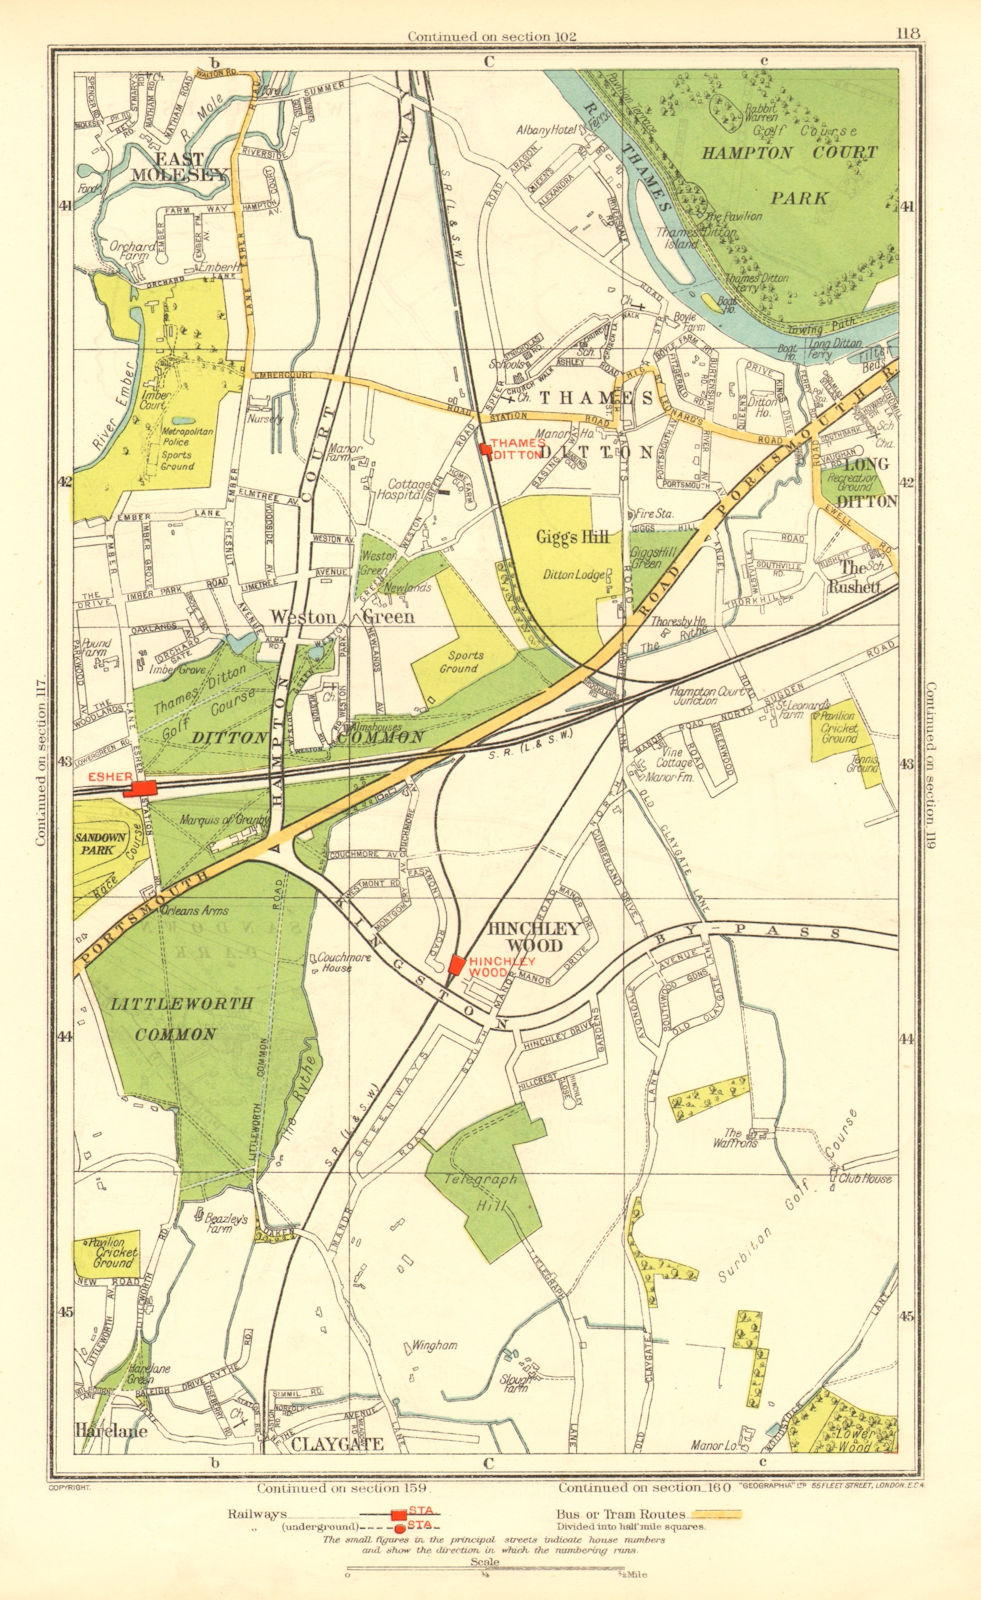 THAMES DITTON / LONG DITTON. Esher East Molesey Claygate Harelane 1937 old map